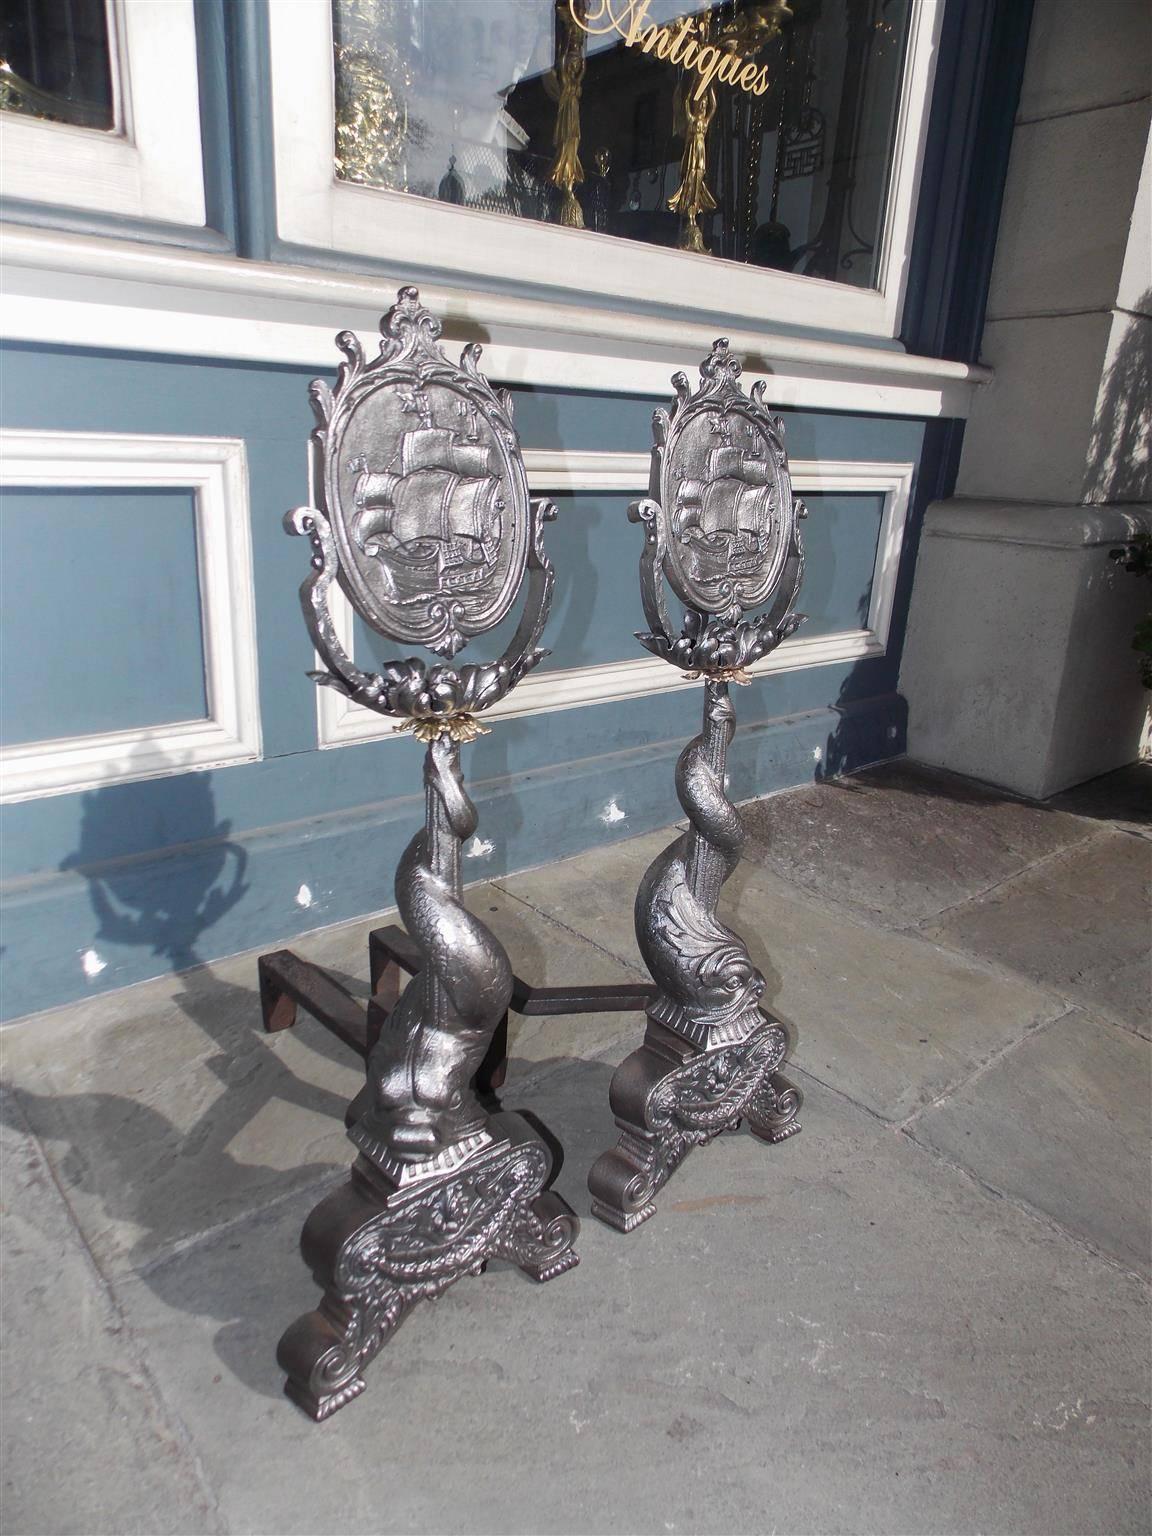 Pair of American polished steel and brass andirons with flanking oval ship medallion finials resting on a floral motif, flanking intertwined dolphins, and terminating on decorative swag bell flower plinths with scrolled feet, Mid-19th Century.